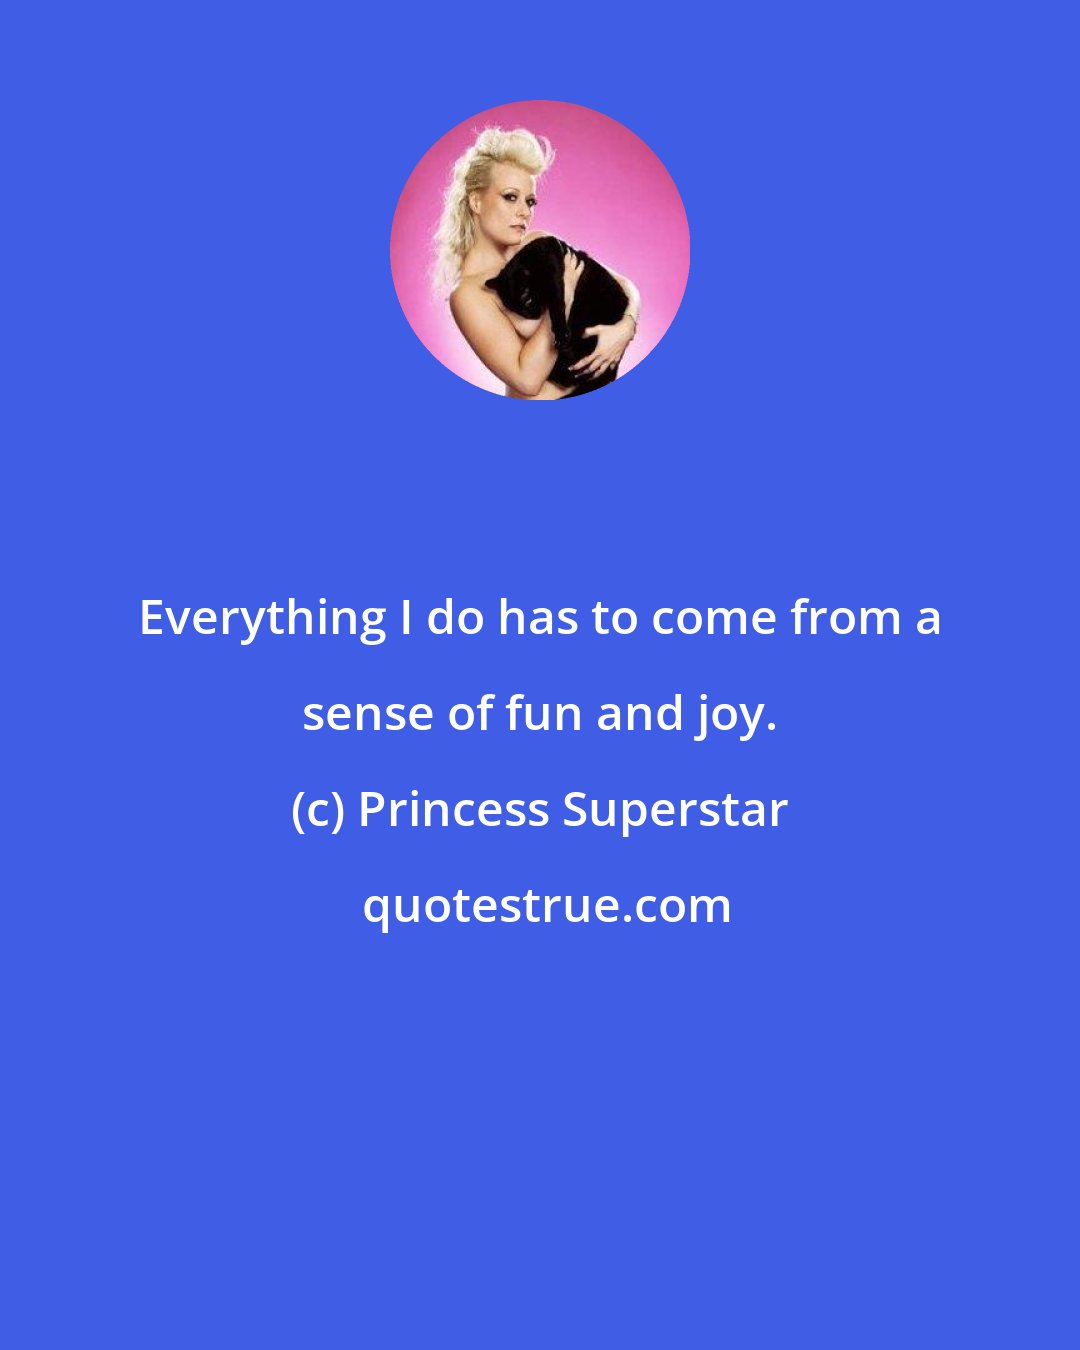 Princess Superstar: Everything I do has to come from a sense of fun and joy.